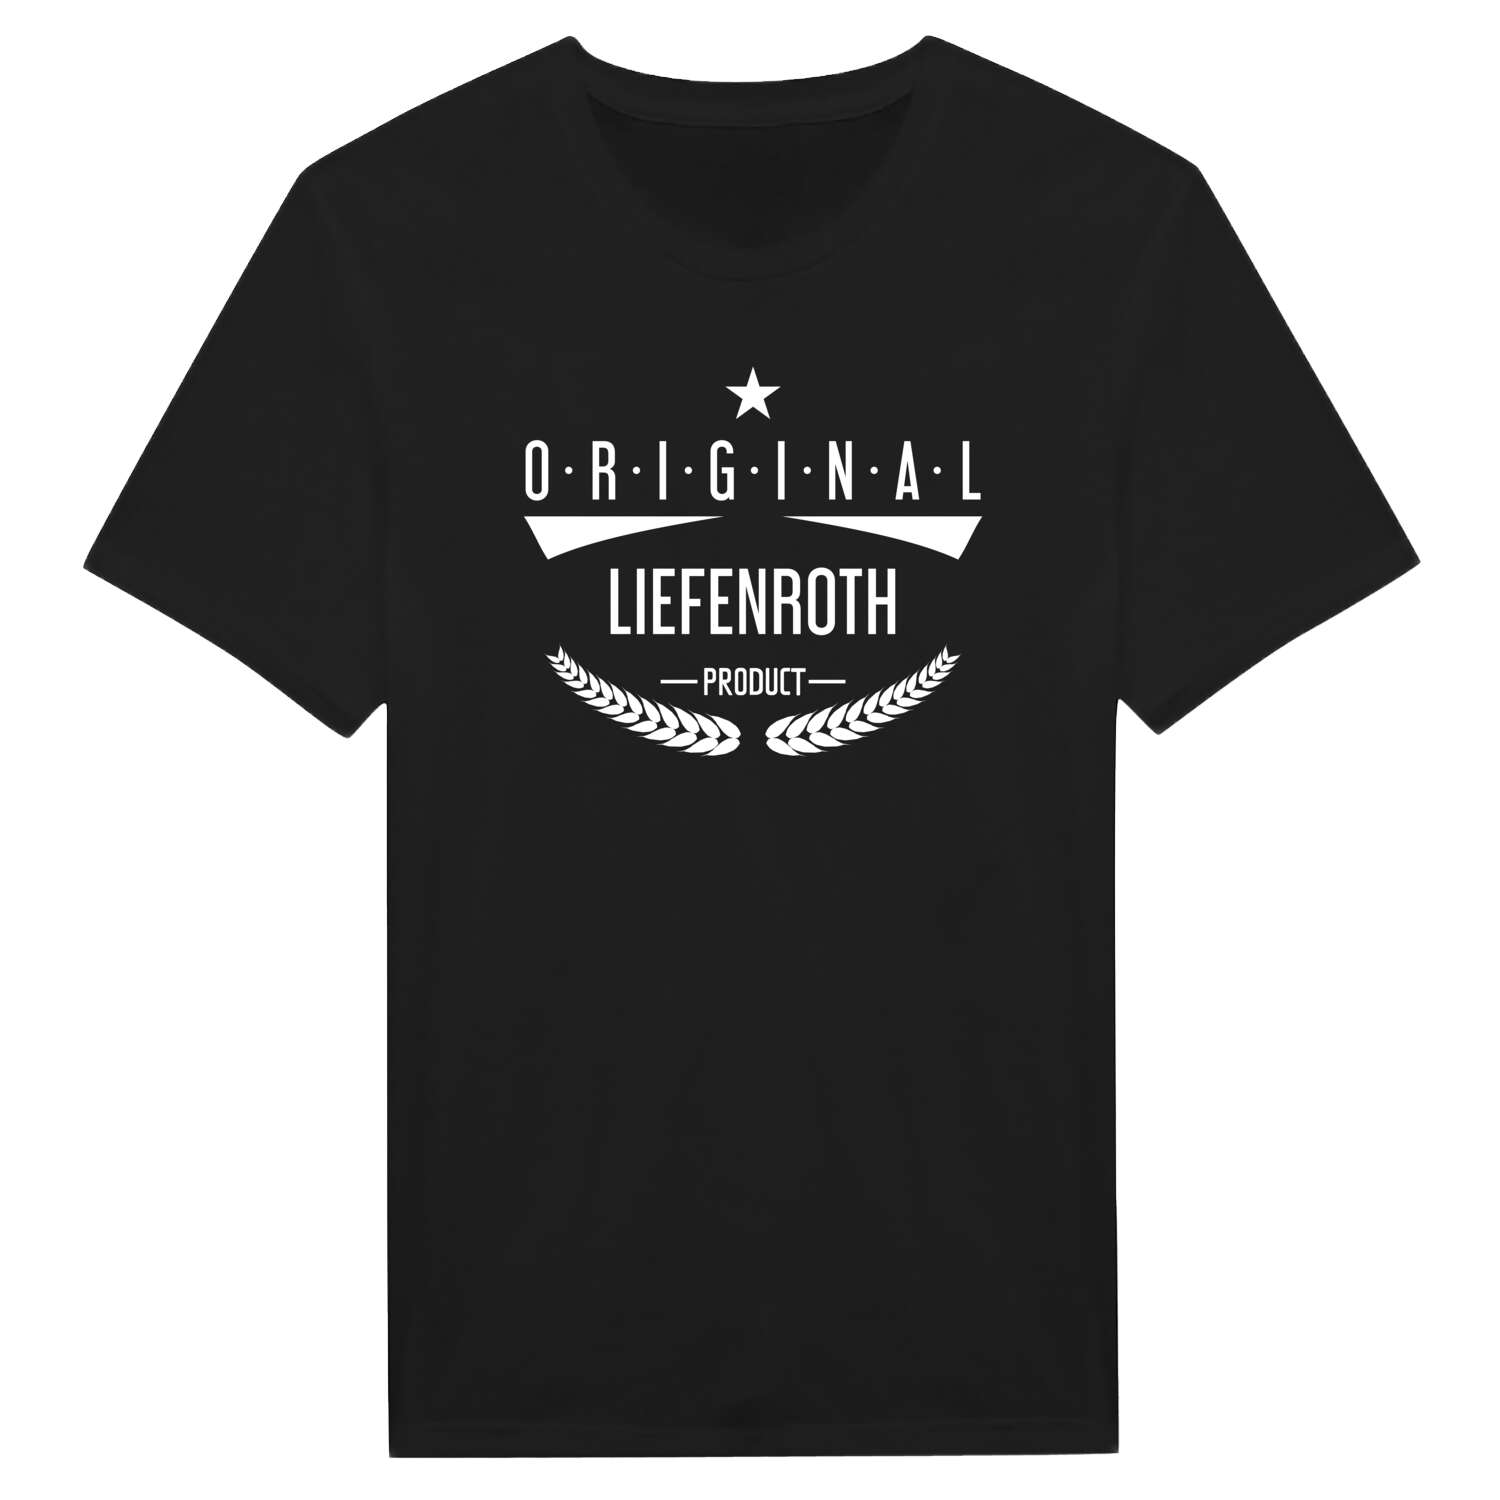 Liefenroth T-Shirt »Original Product«